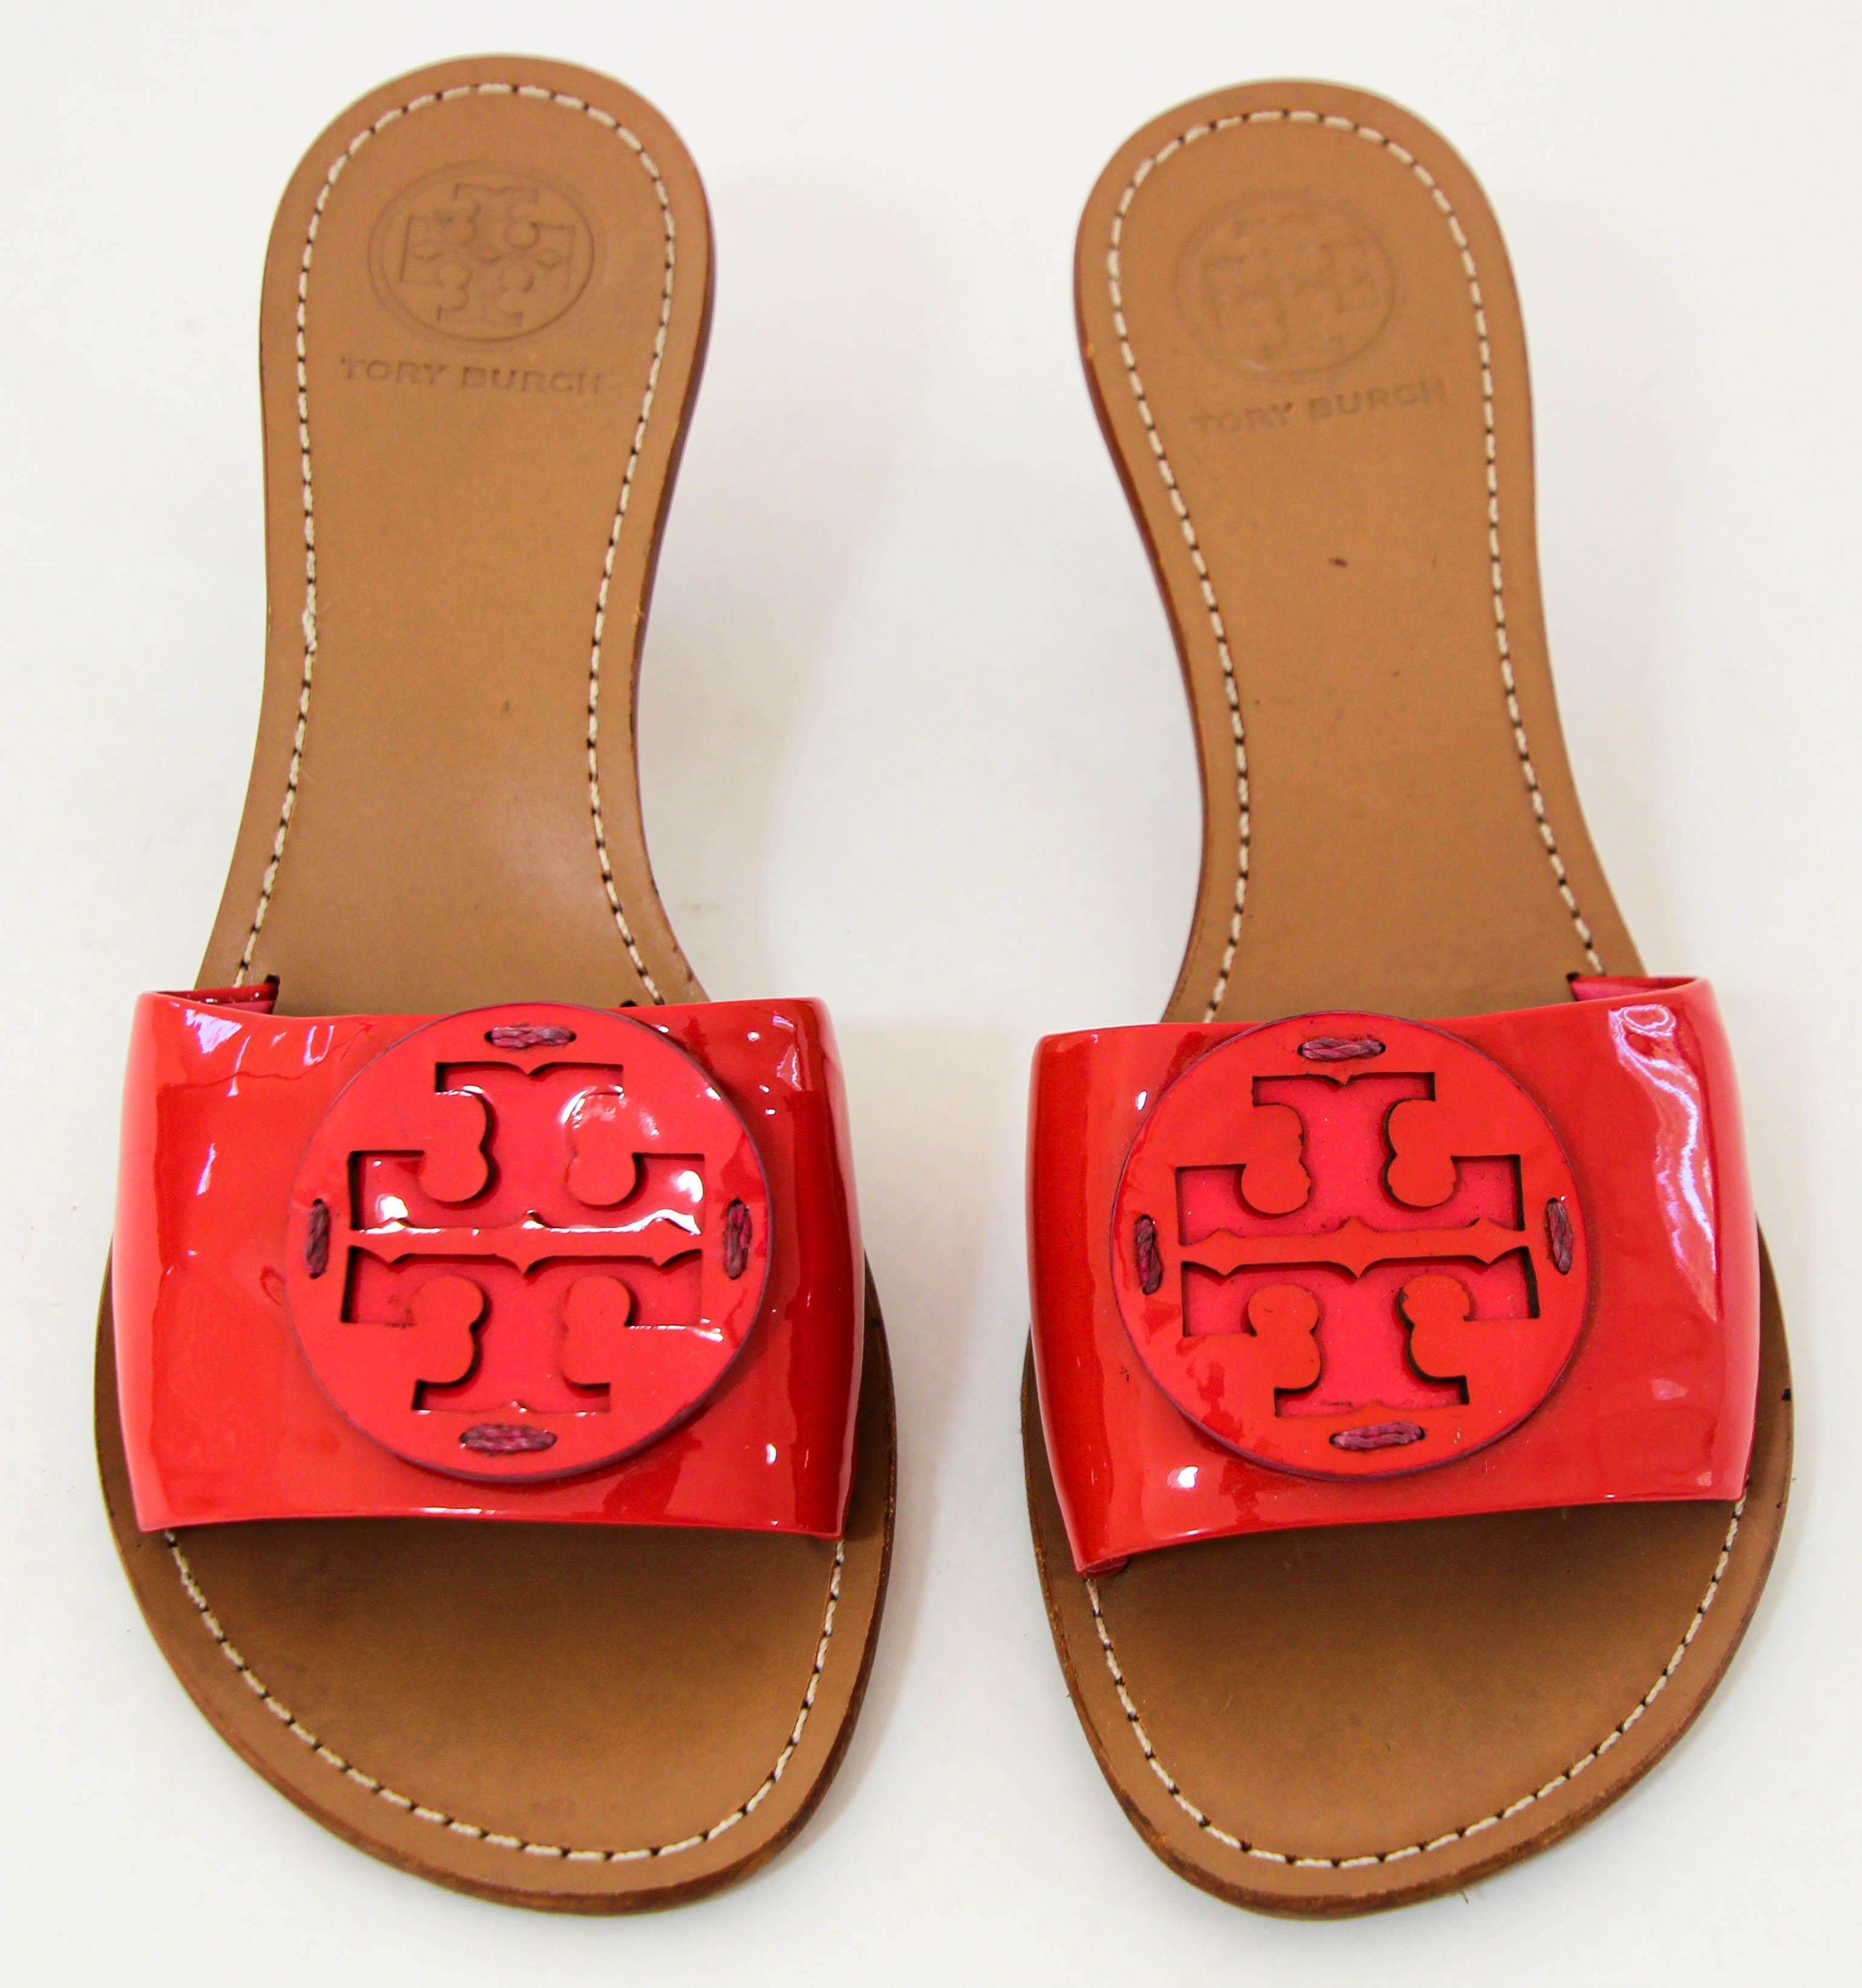 Tory Burch Patent Leather Pink Sandals size 8 M For Sale 10